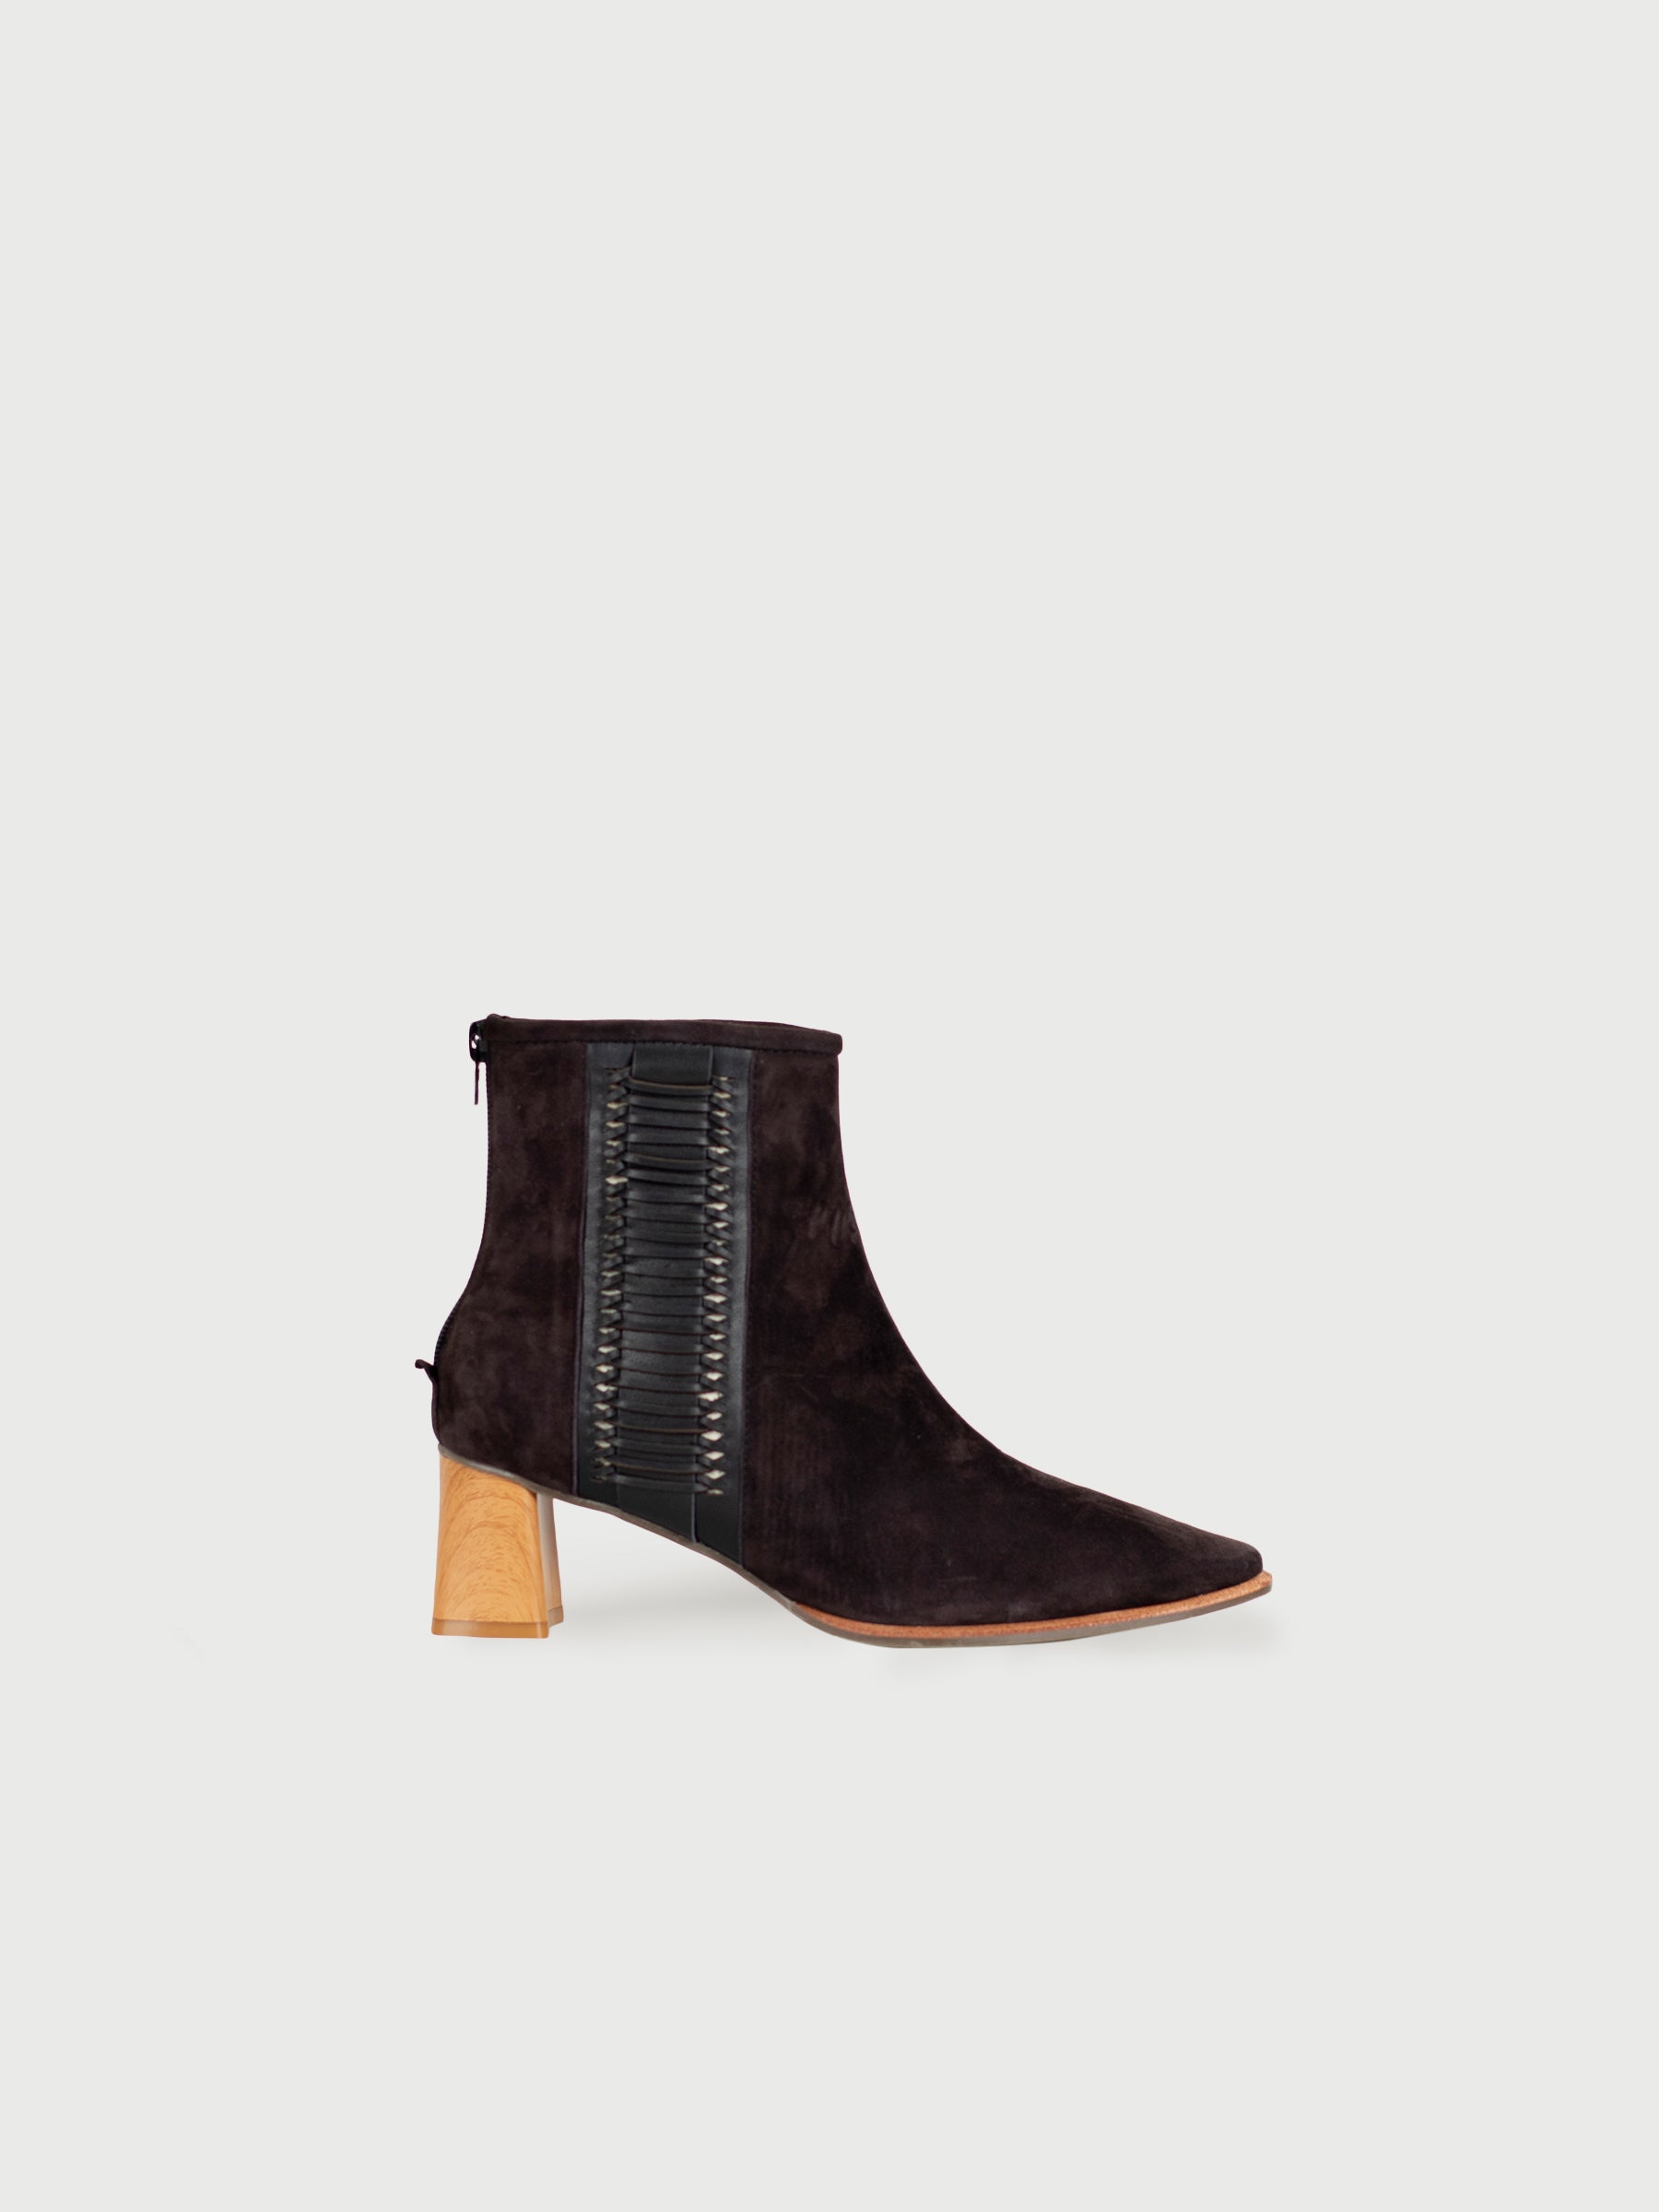 Wooden-Heel Suede Ankle Boots